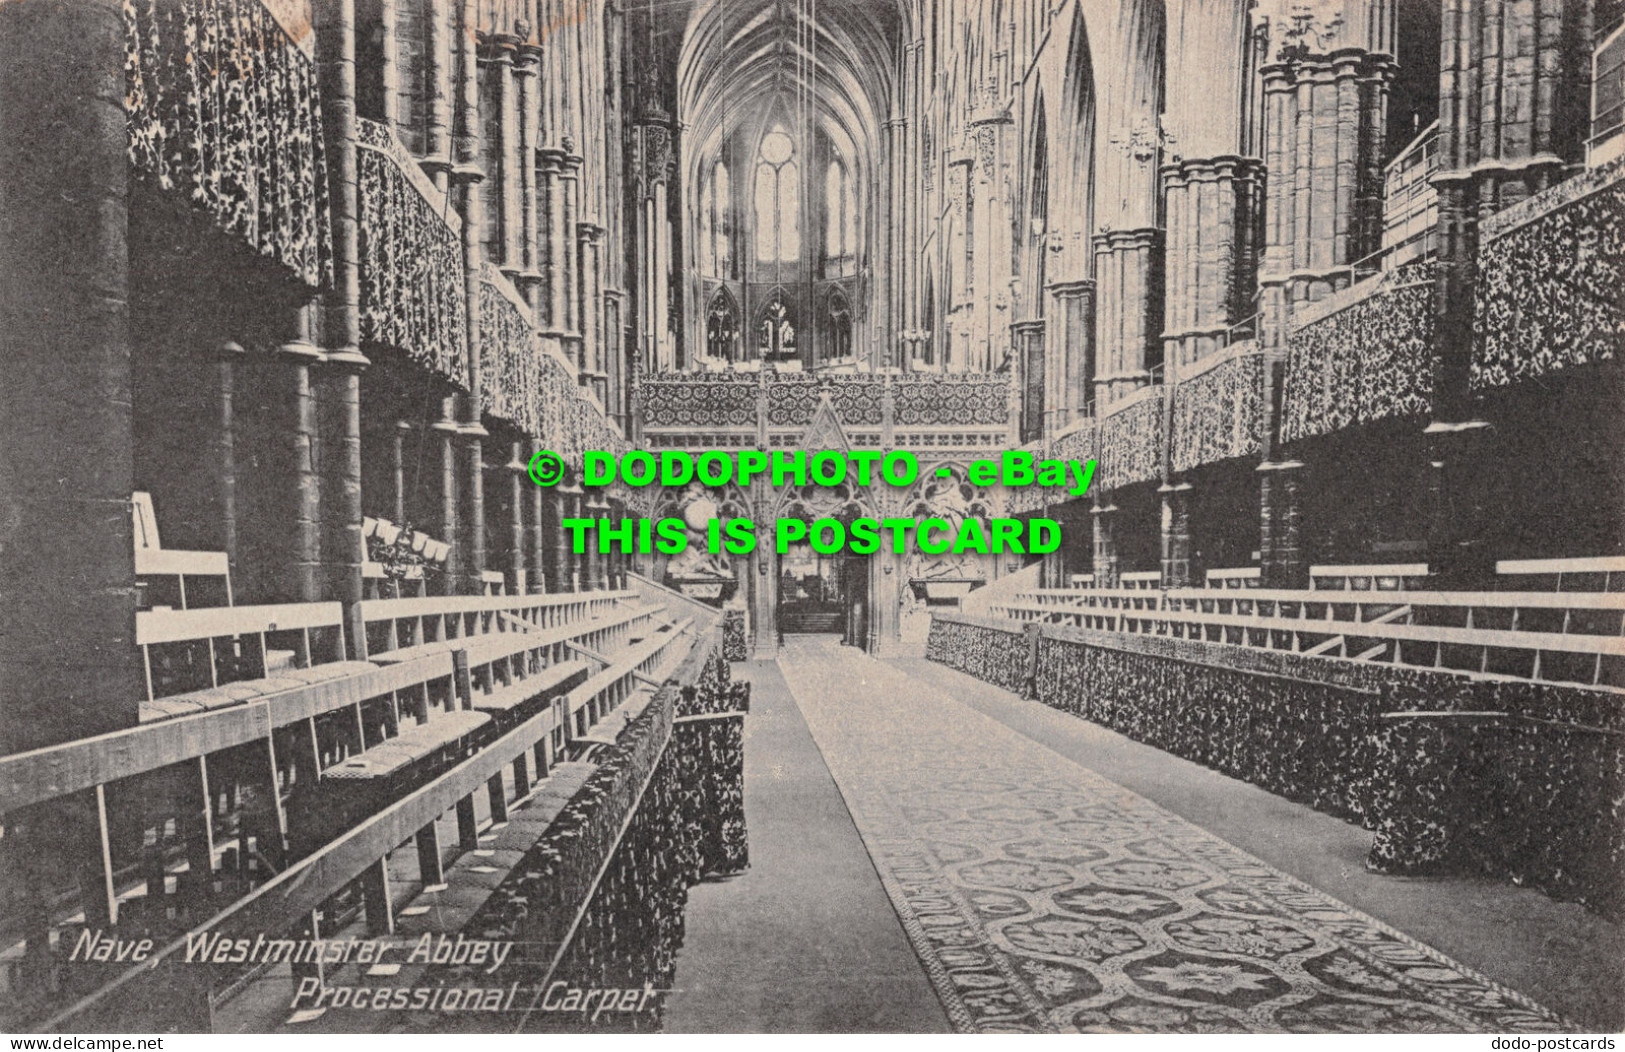 R506778 Nave Westminster Abbey. Processional Carpet. Valentine - World